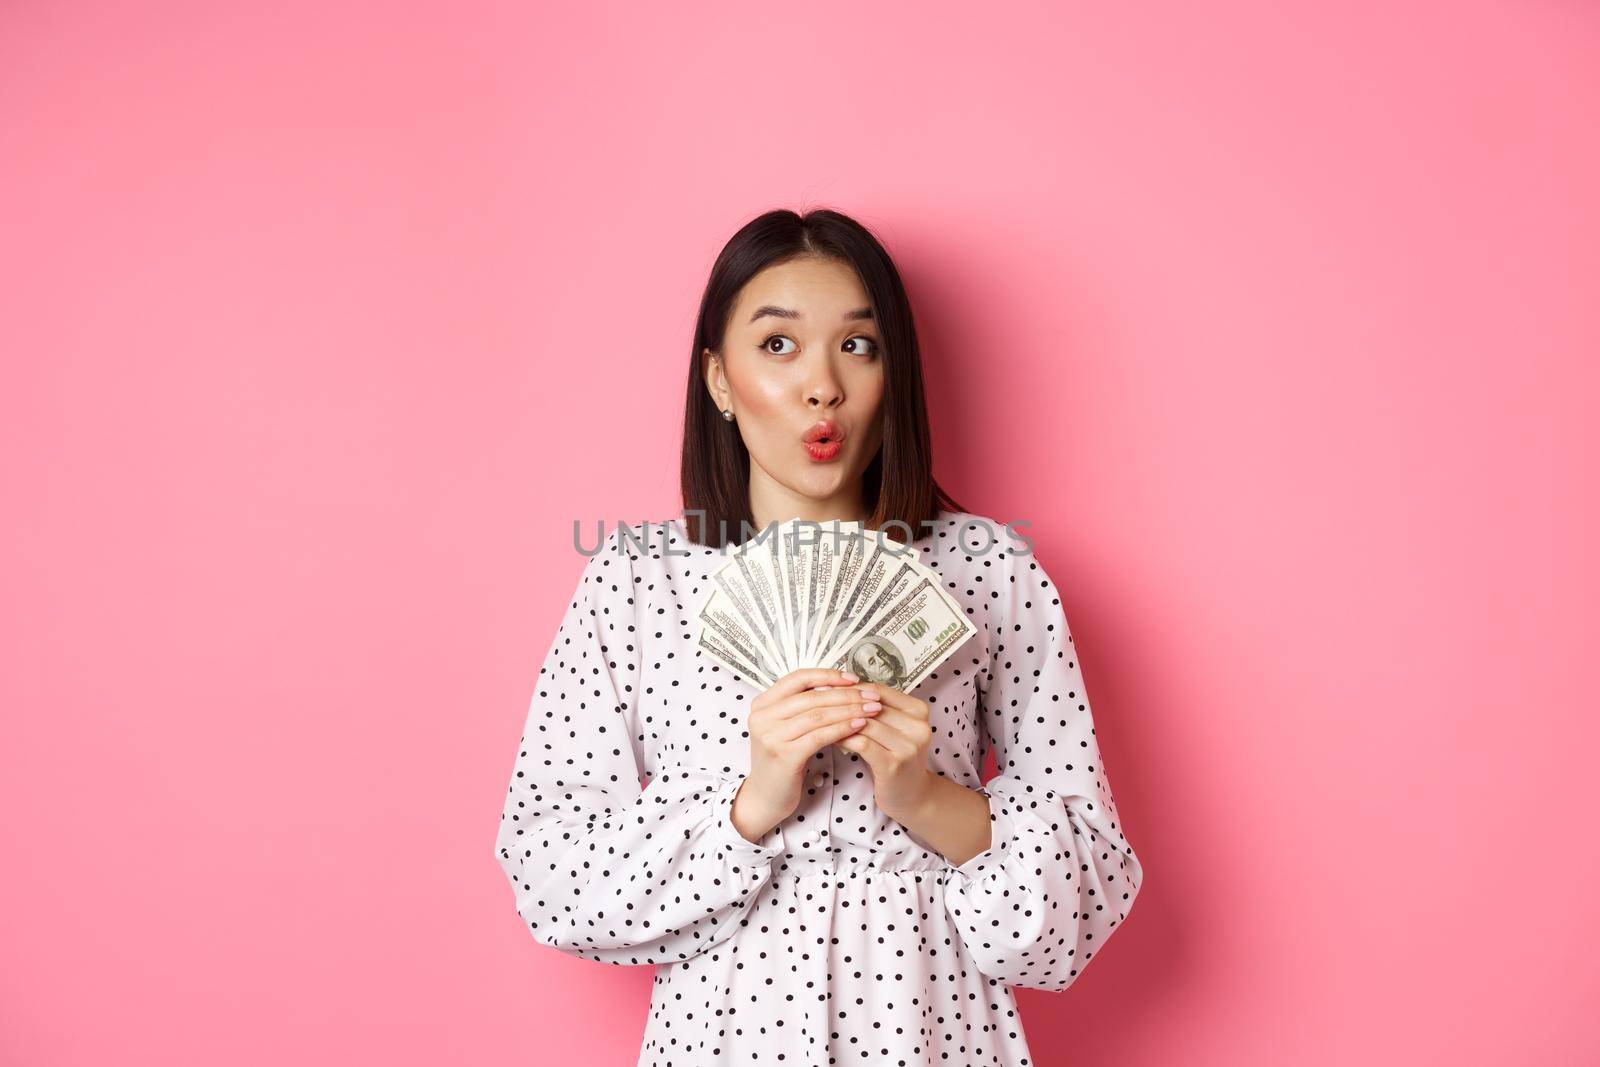 Shopping concept. Dreamy asian woman thinking, holding money dollars and looking aside thoughtful, standing over pink background.